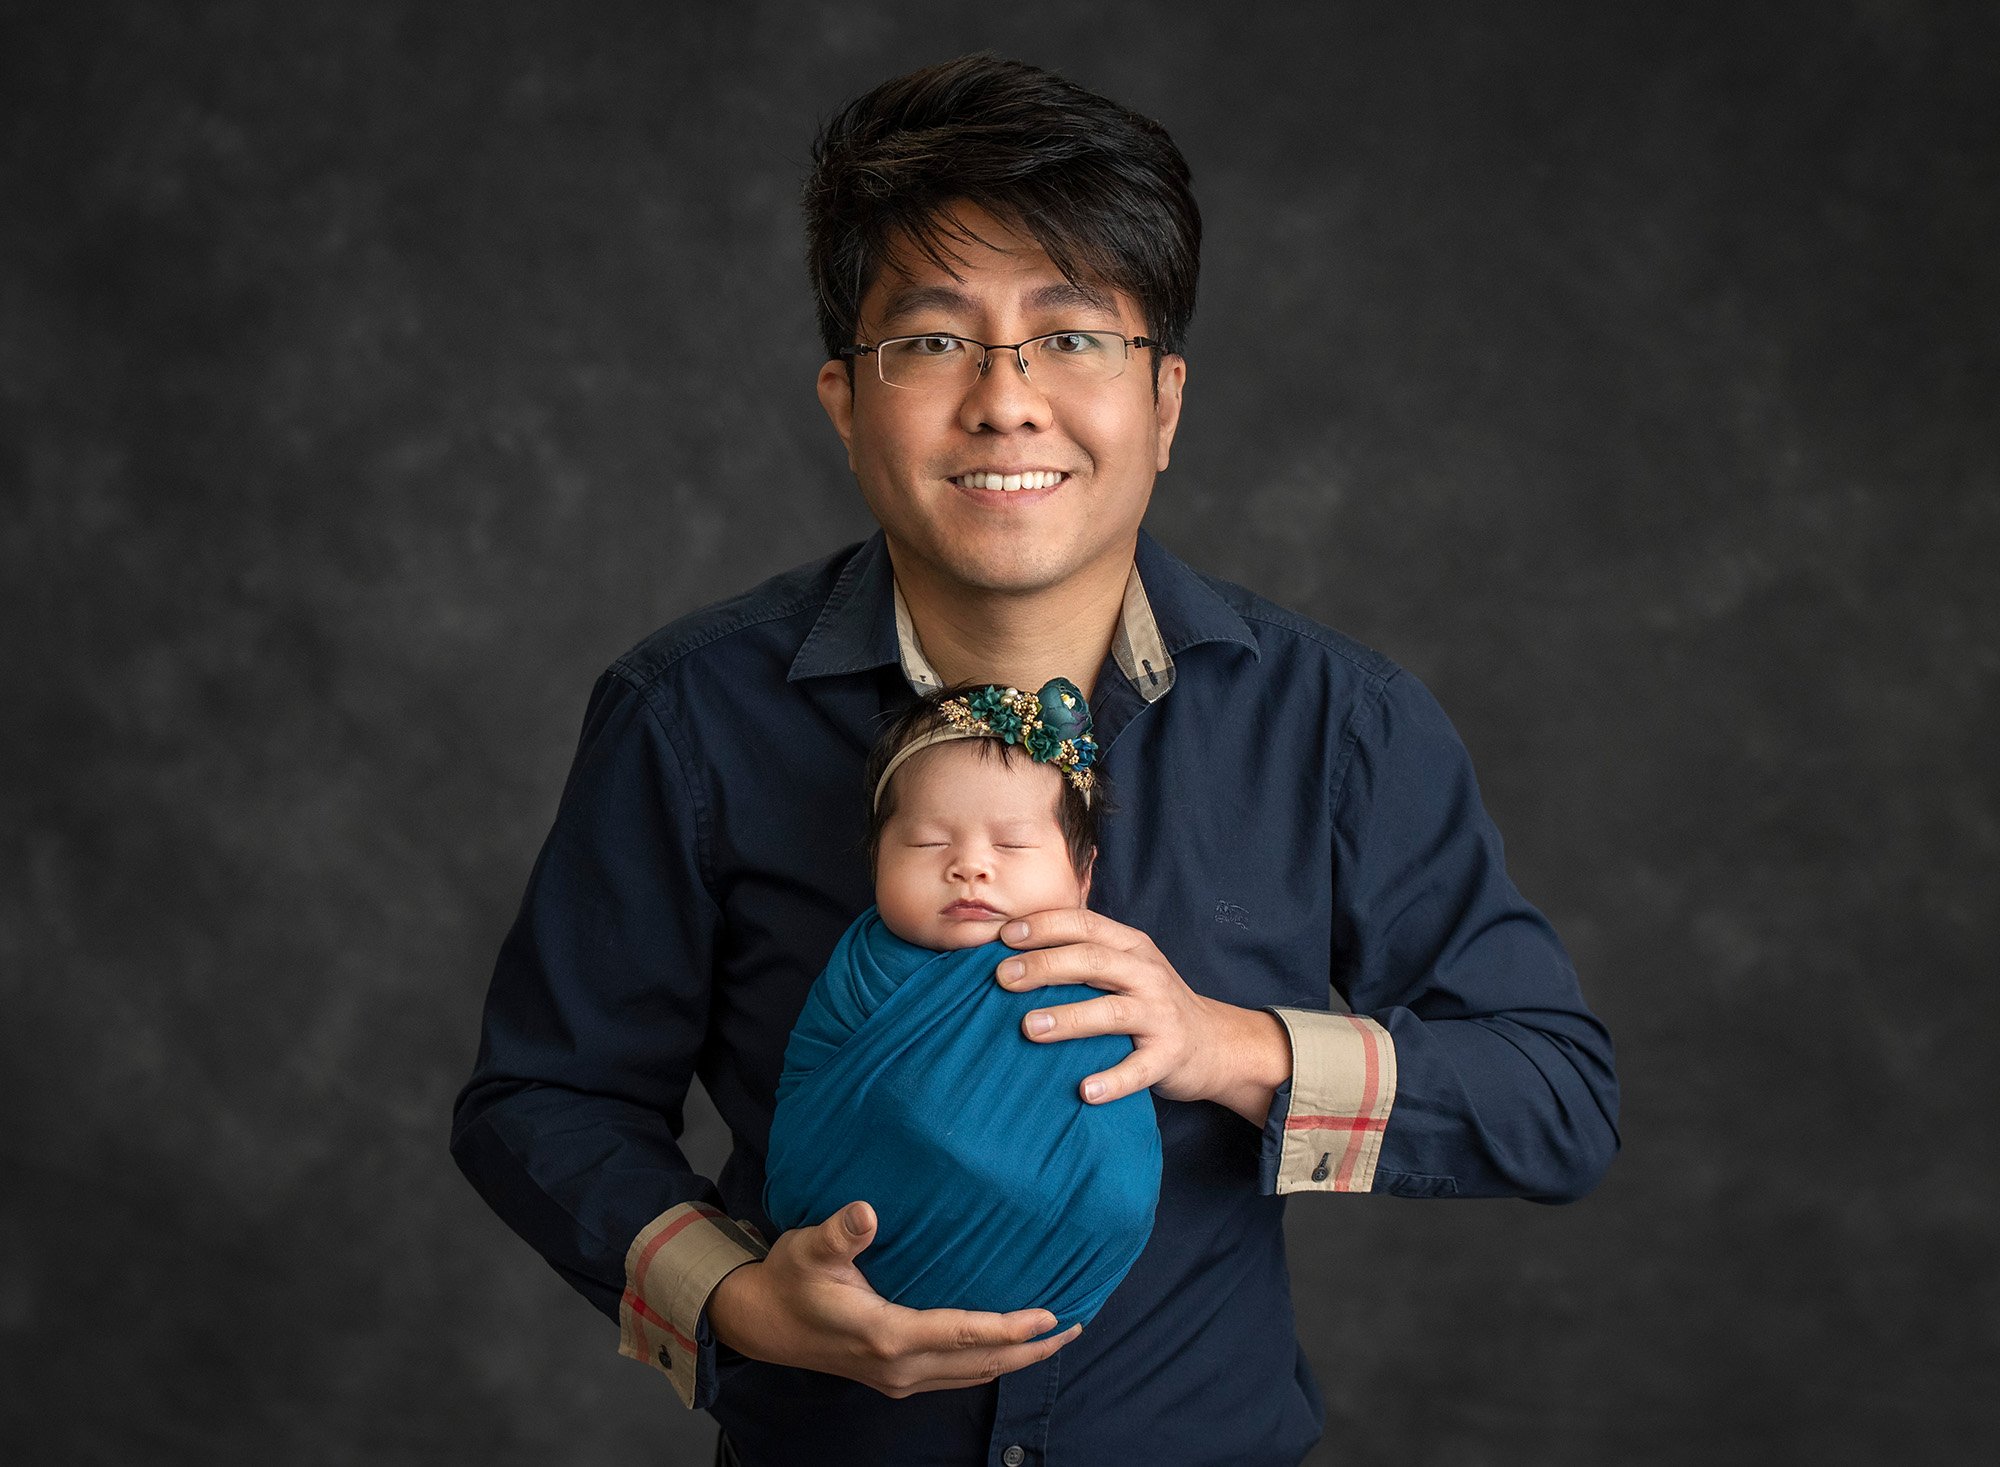 new dad wearing Burberry button up holding newborn baby girl swaddled in dark teal wrap wearing teal floral headband on dark grey background